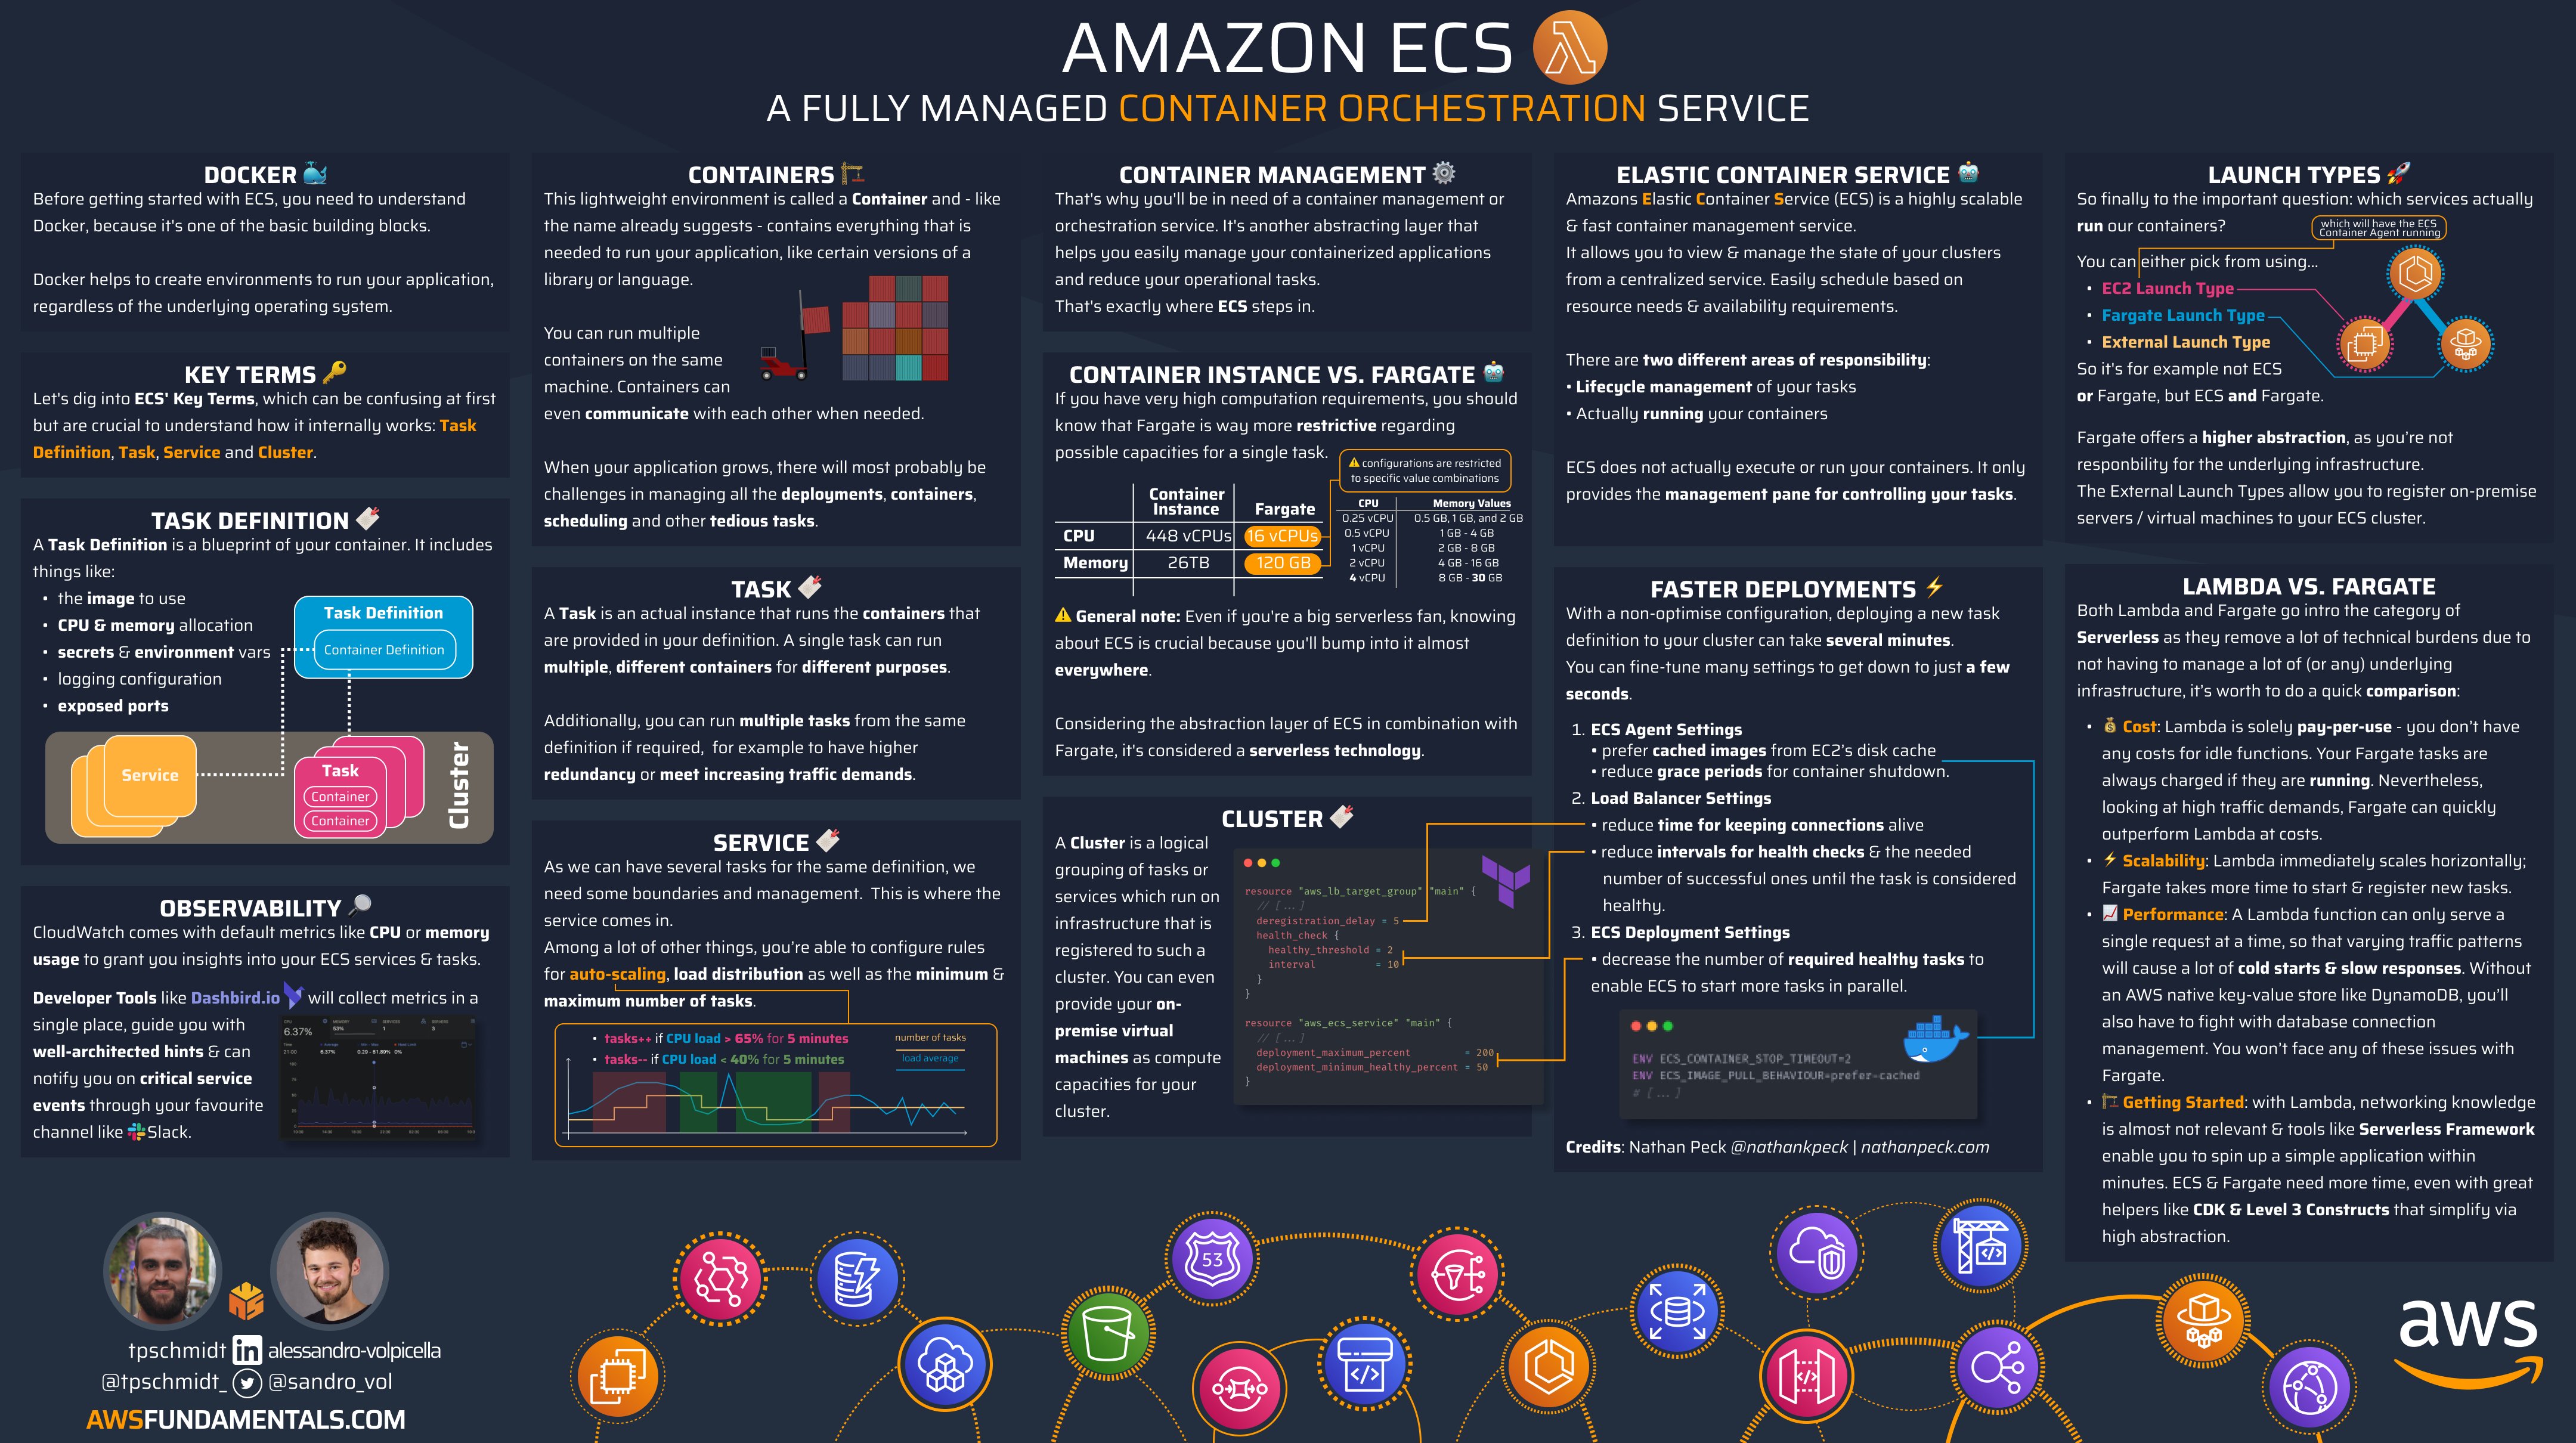 Amazon ECS - A fully managed container orchestration service.